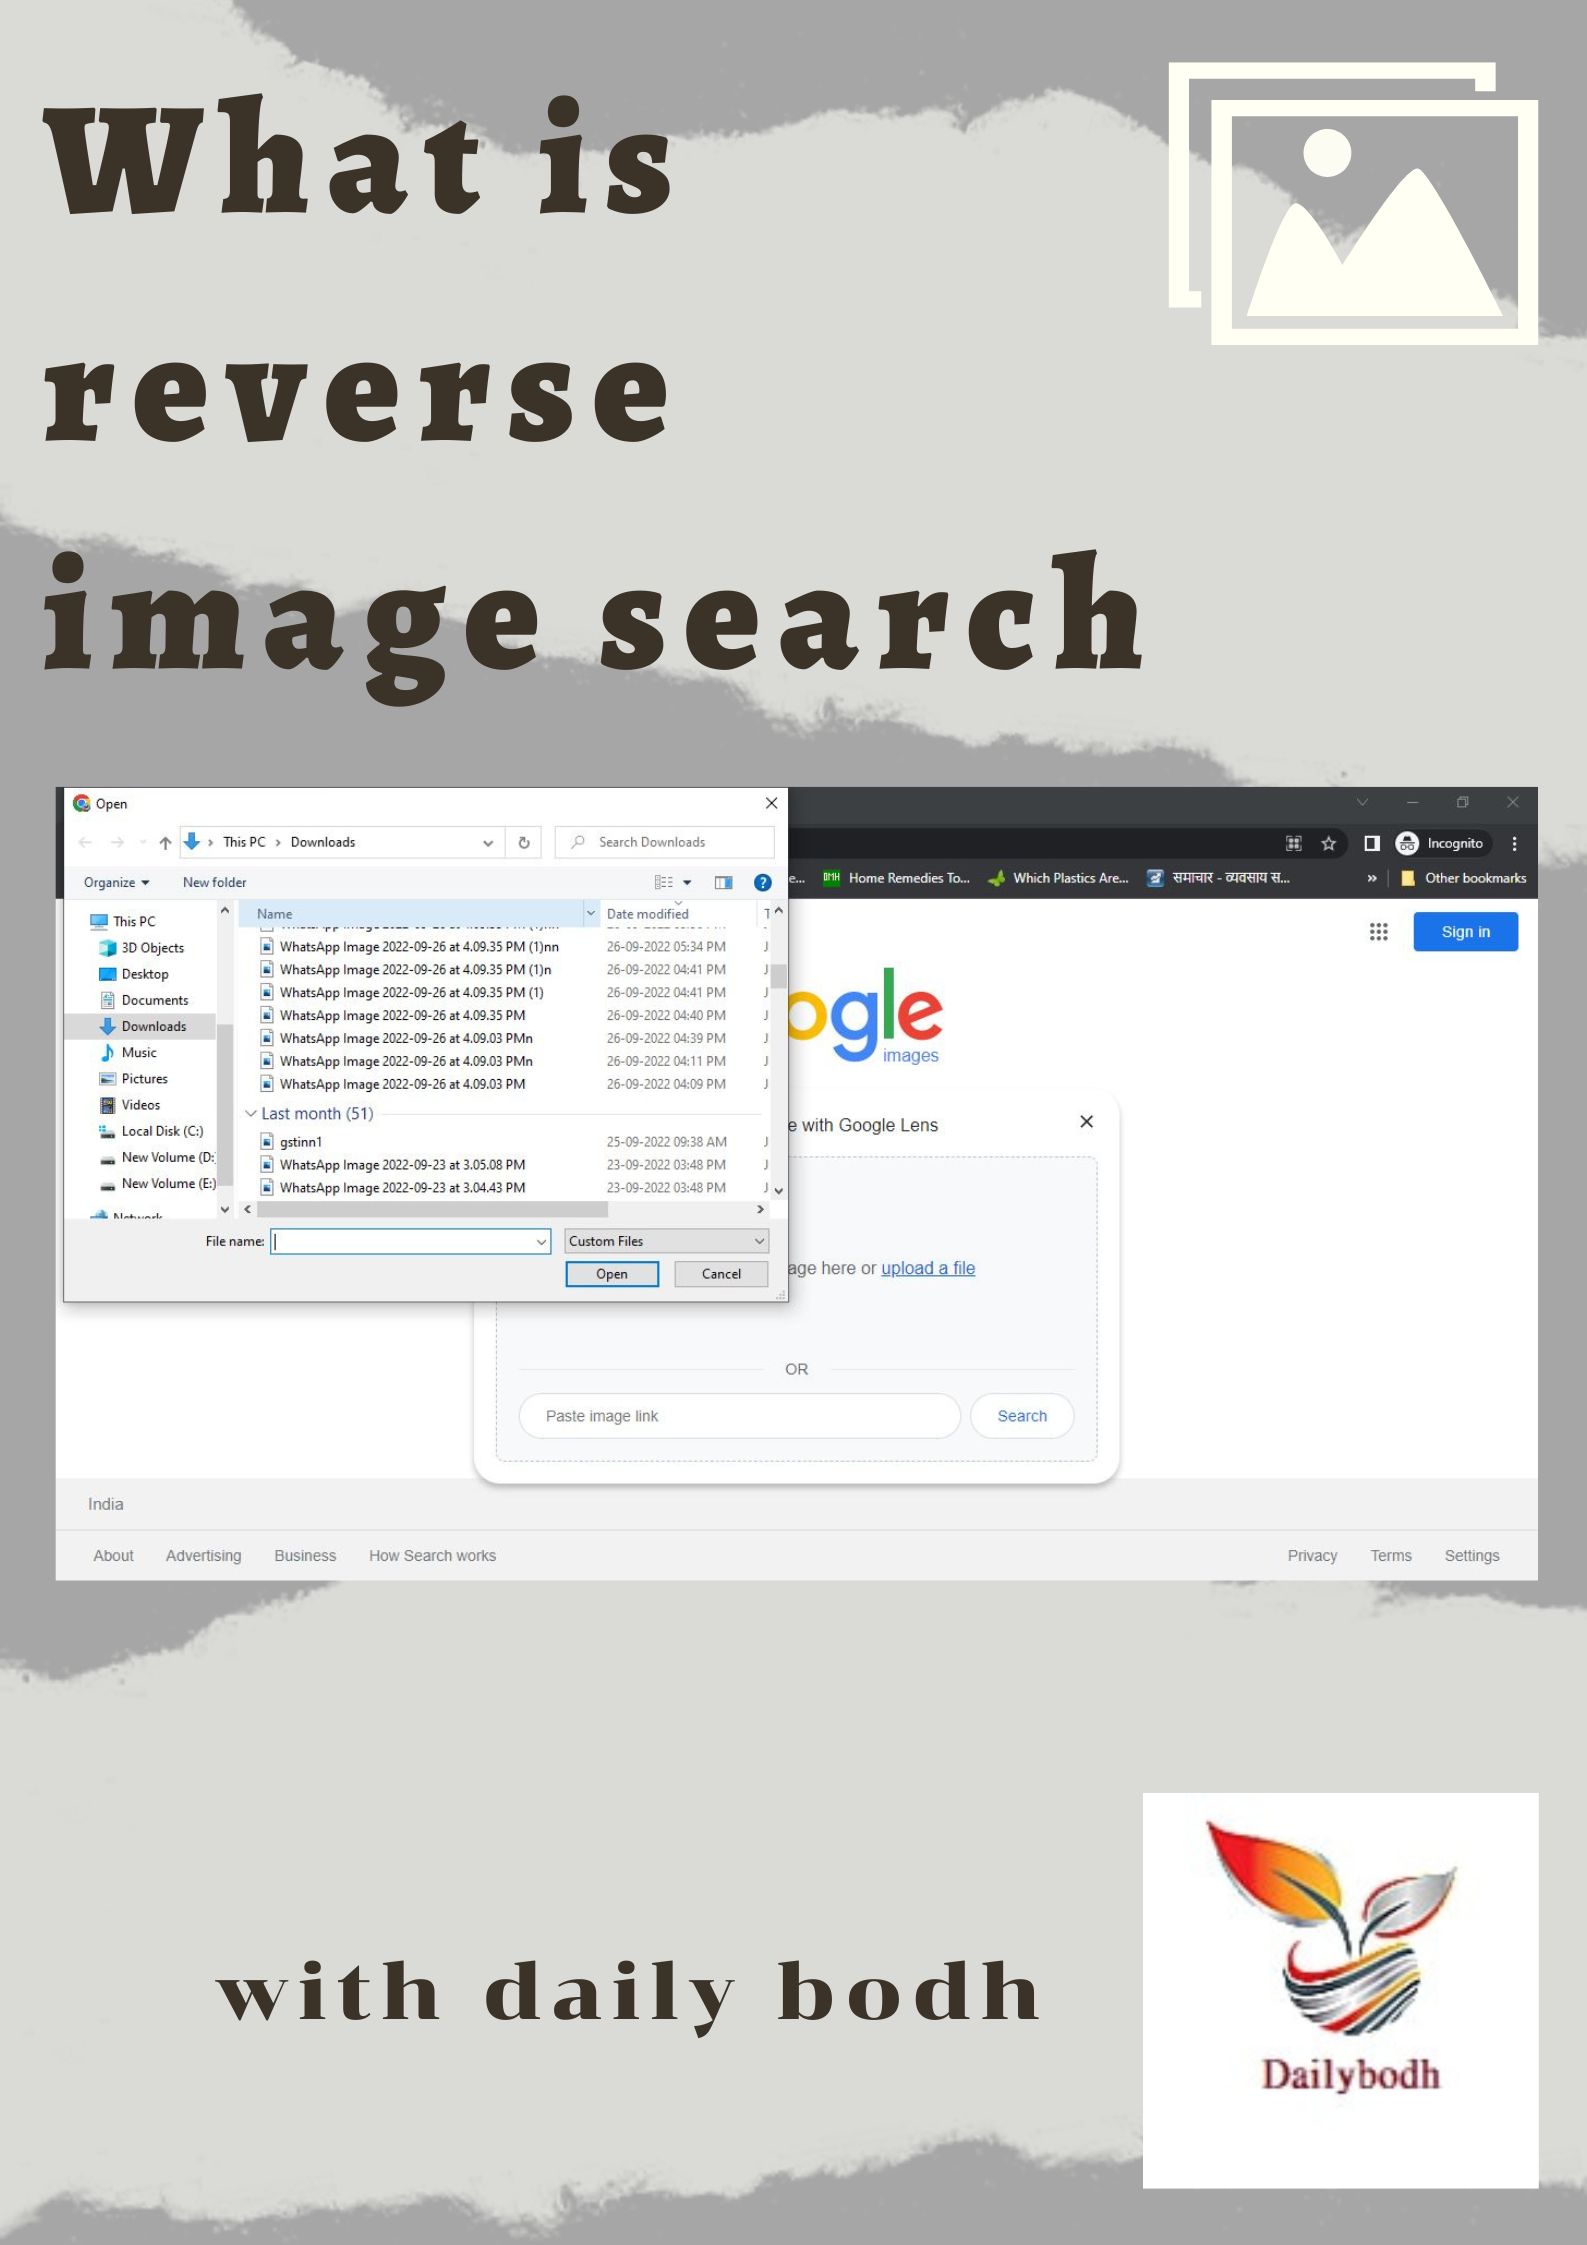 What is reverse image search